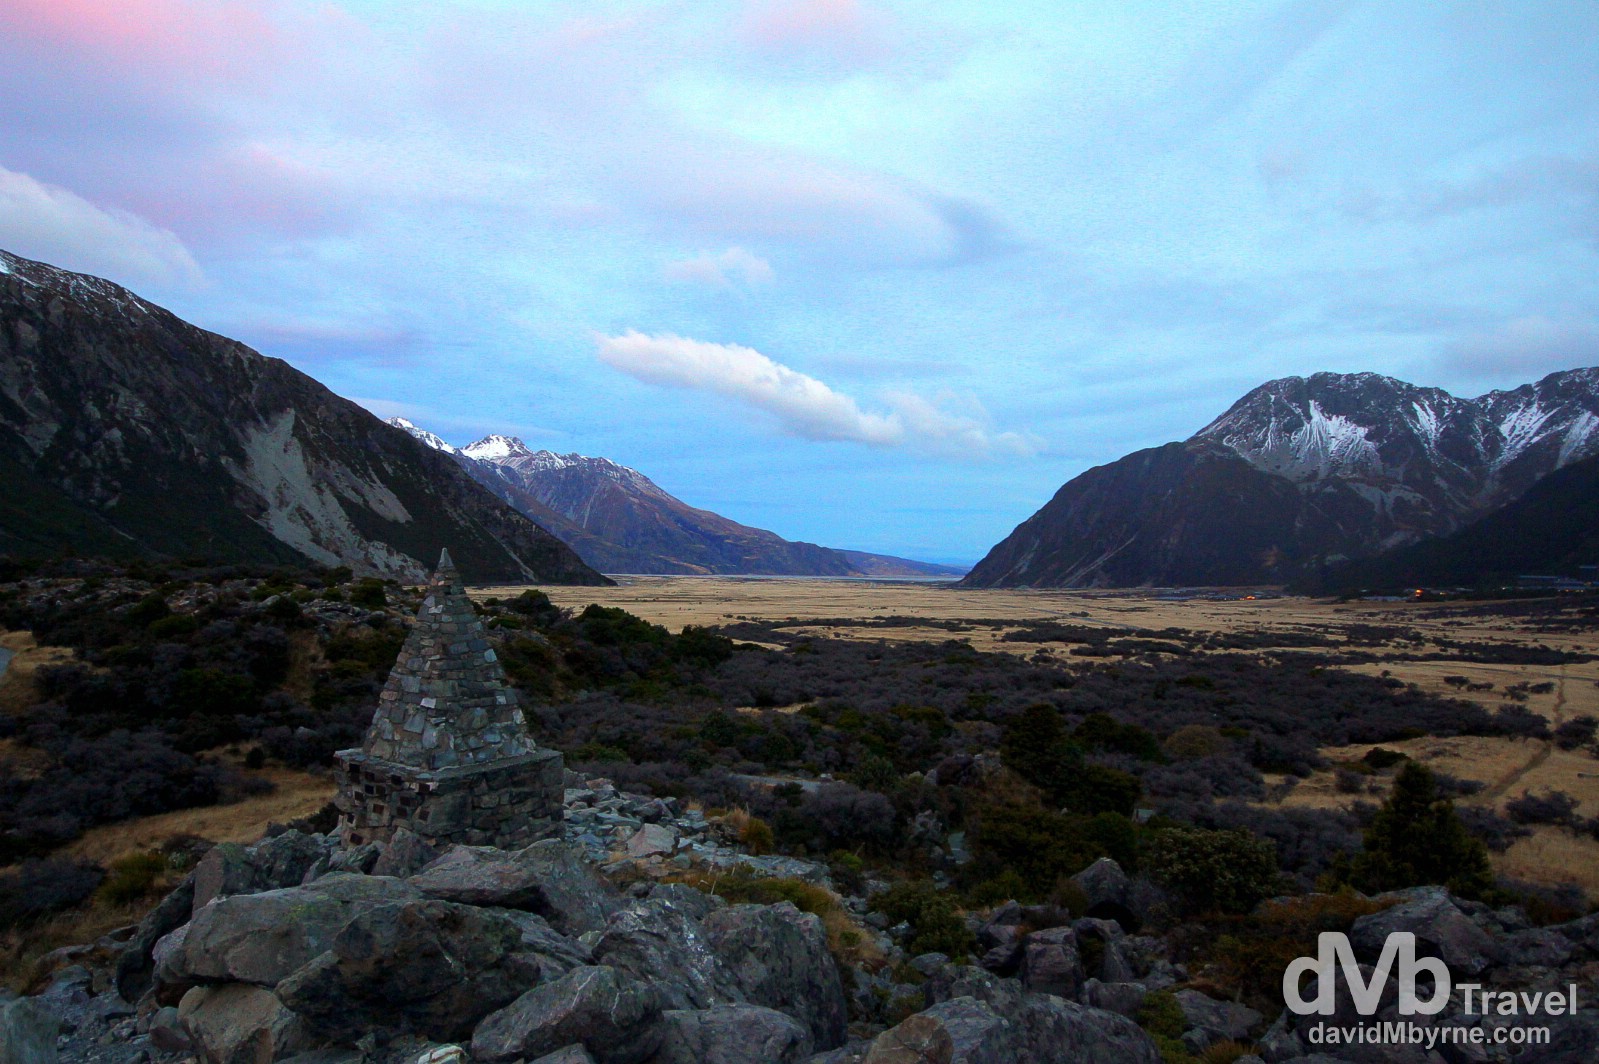 A late evening image of the landscape surrounding Mount Cook Village, Mount Cook National Park, South Island, New Zealand. May 30th 2012.